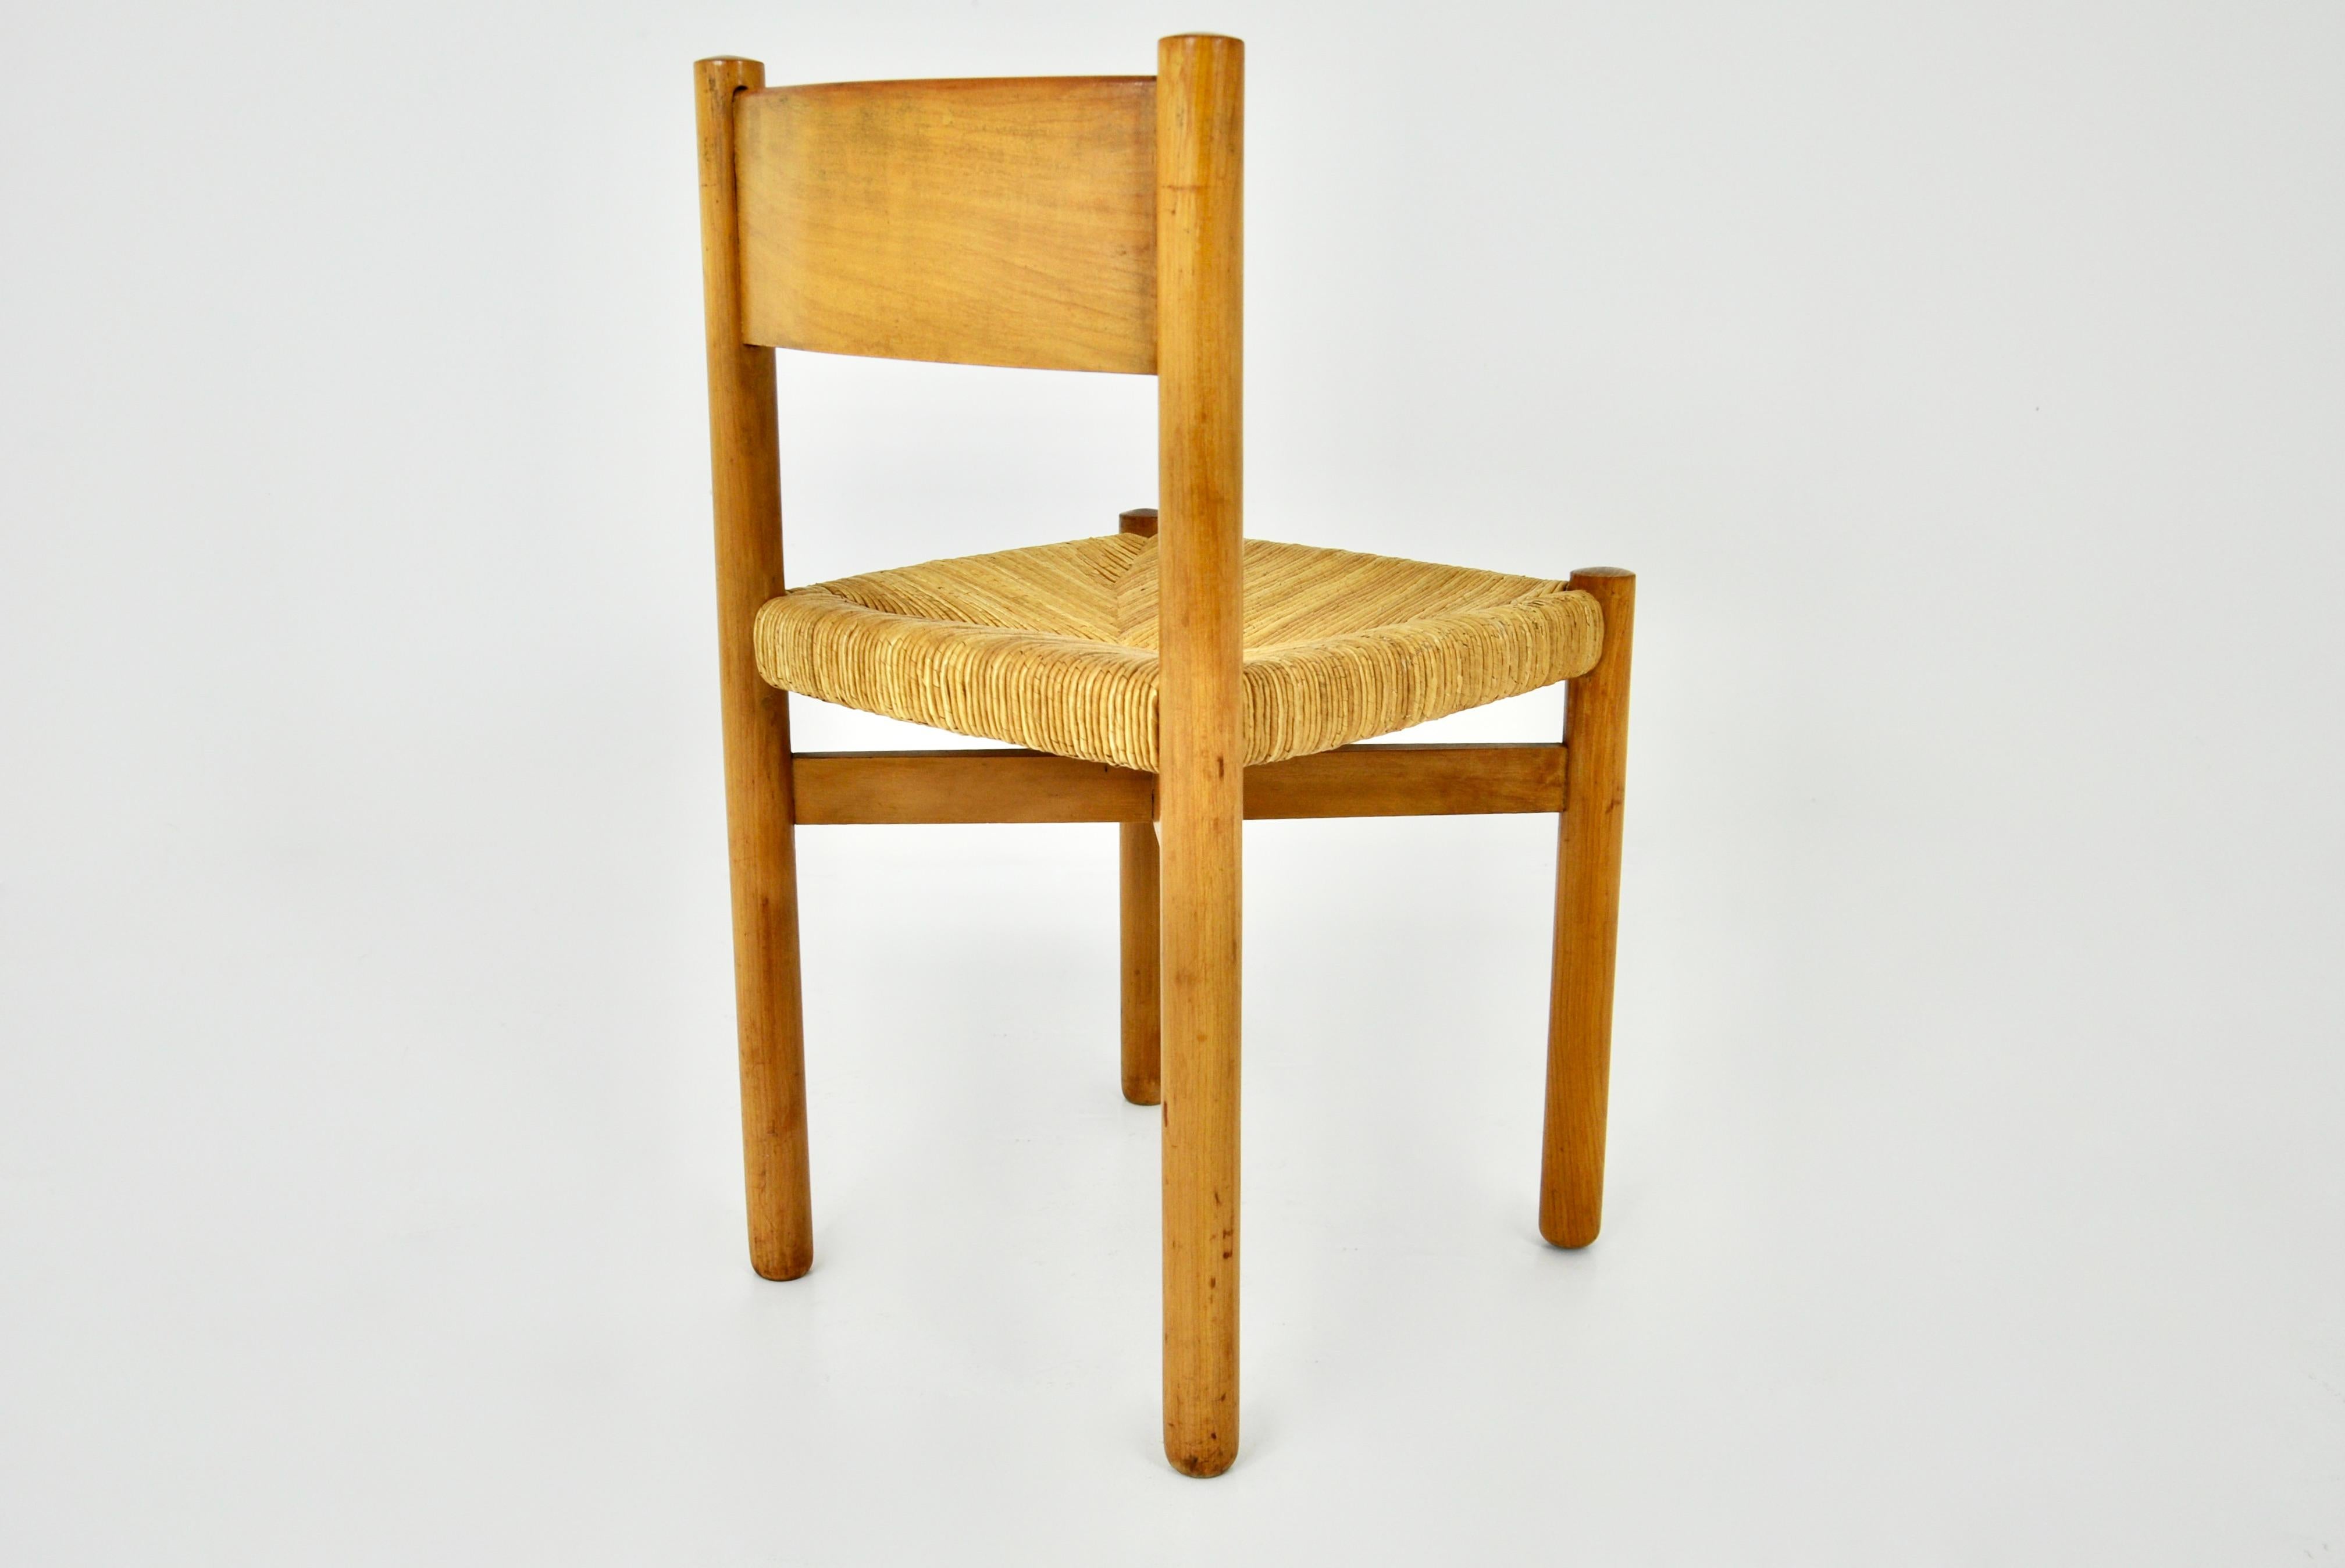 Wood Meribel chair by Charlotte Perriand for Steph Simon, 1950s